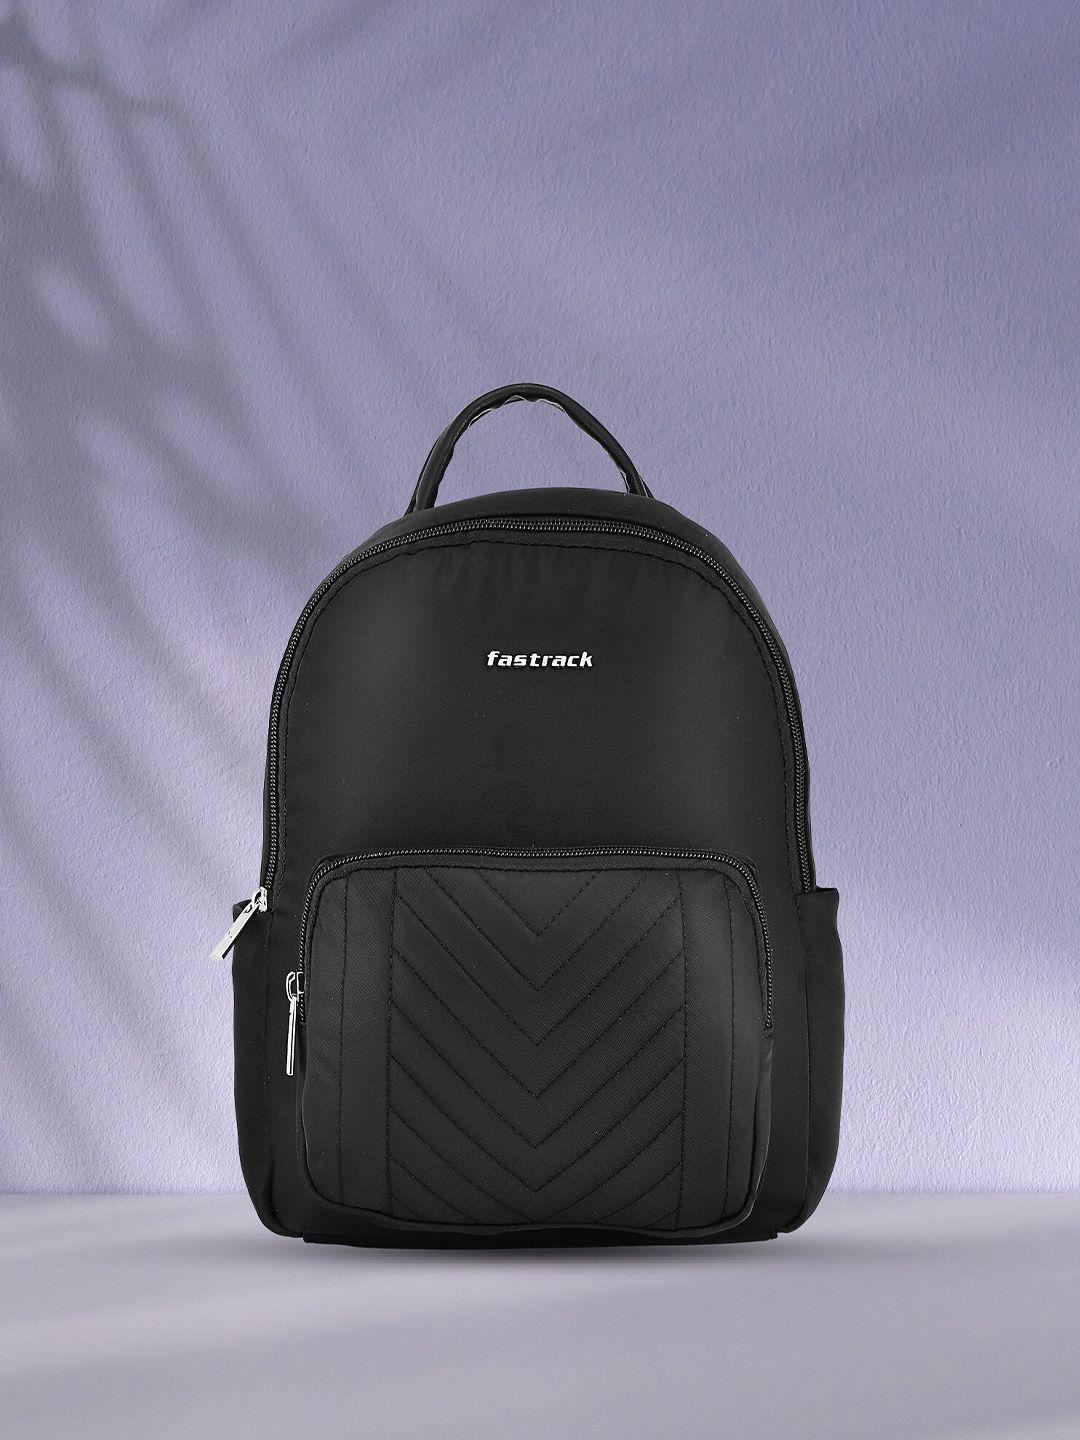 fastrack women small backpack